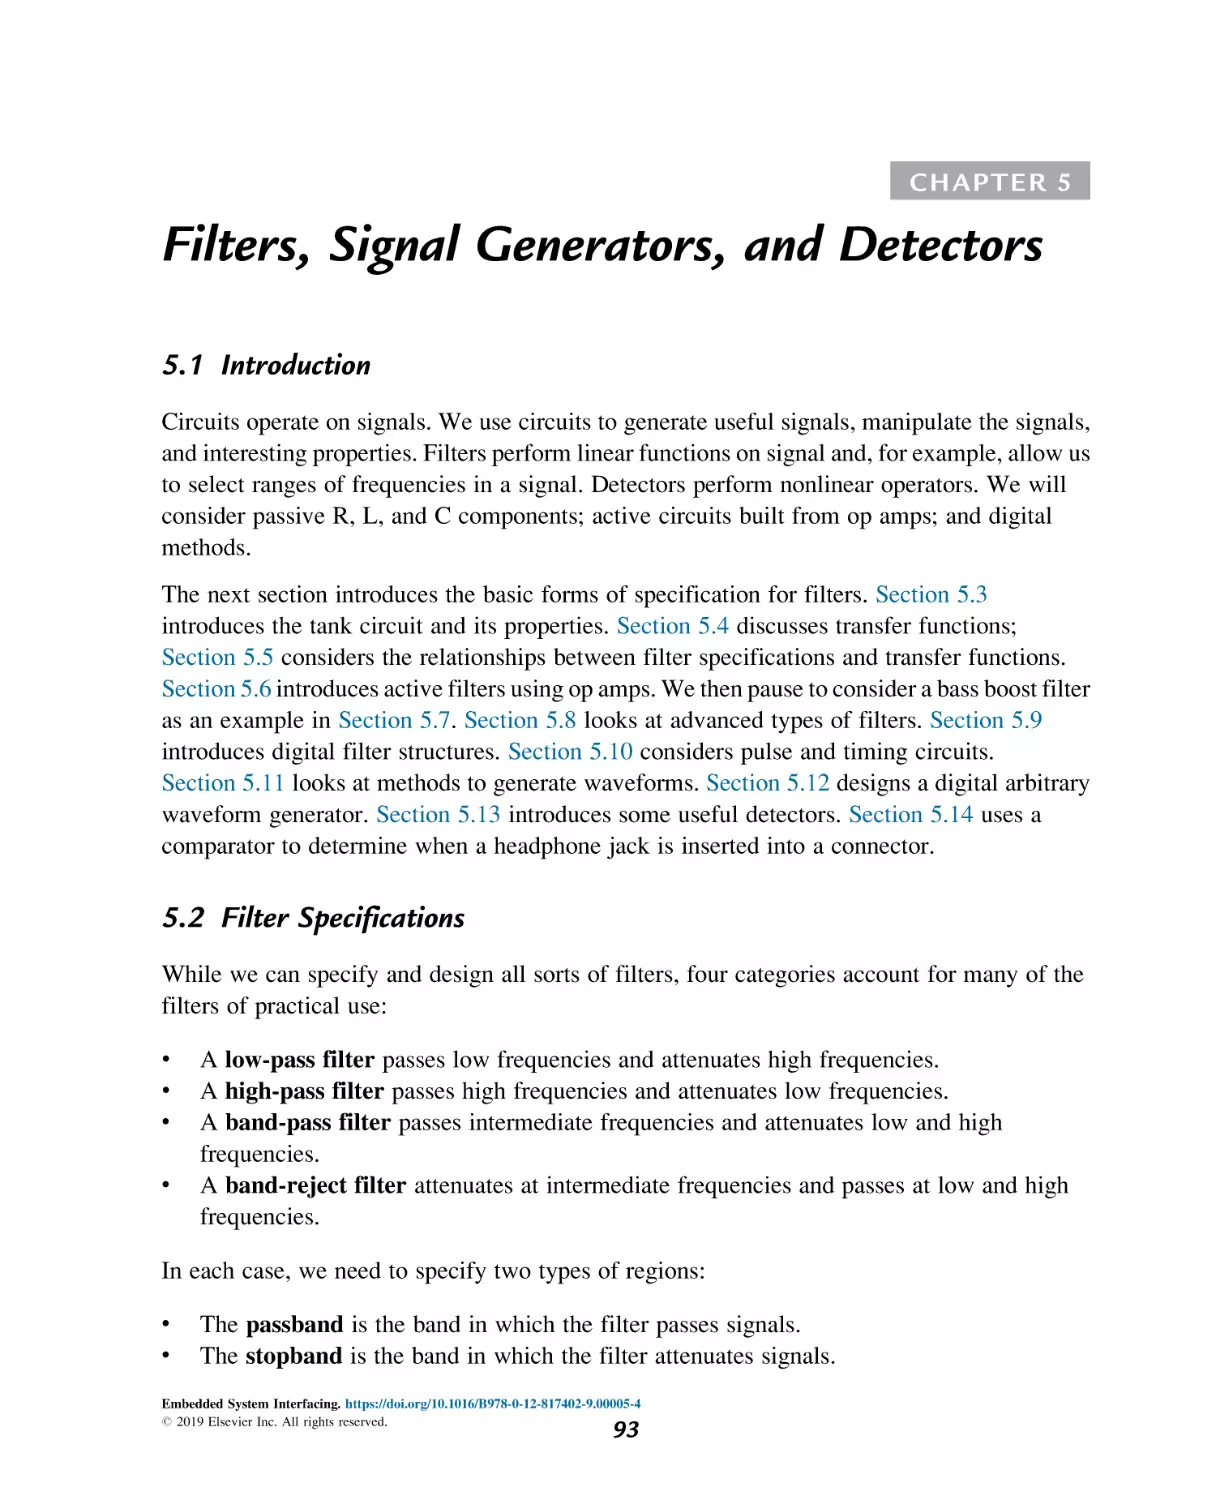 5
Filters, Signal Generators, and Detectors
Introduction
Filter Specifications